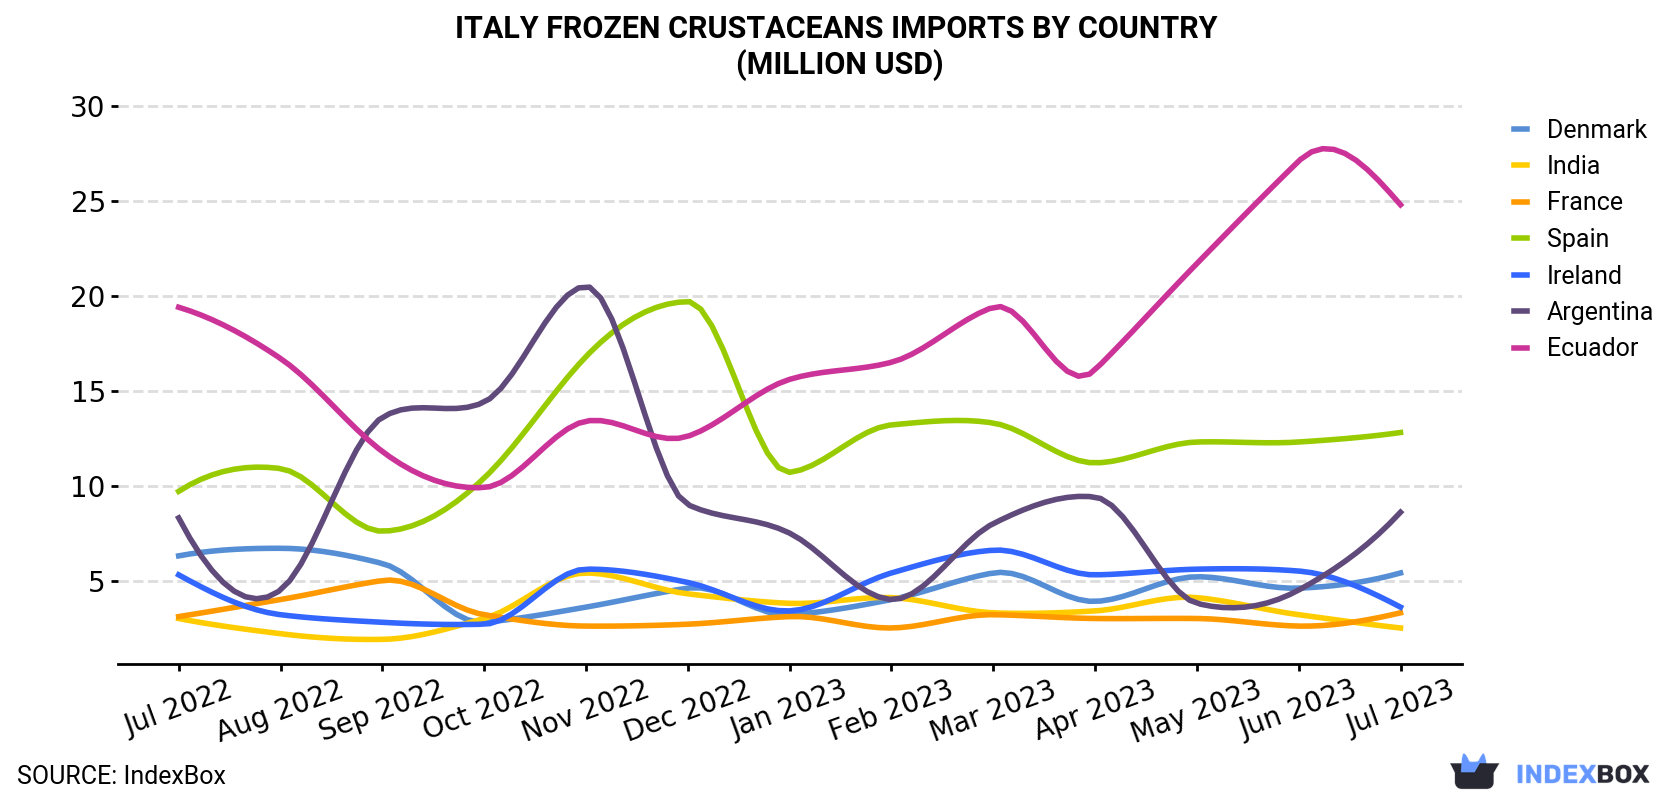 Italy Frozen Crustaceans Imports By Country (Million USD)